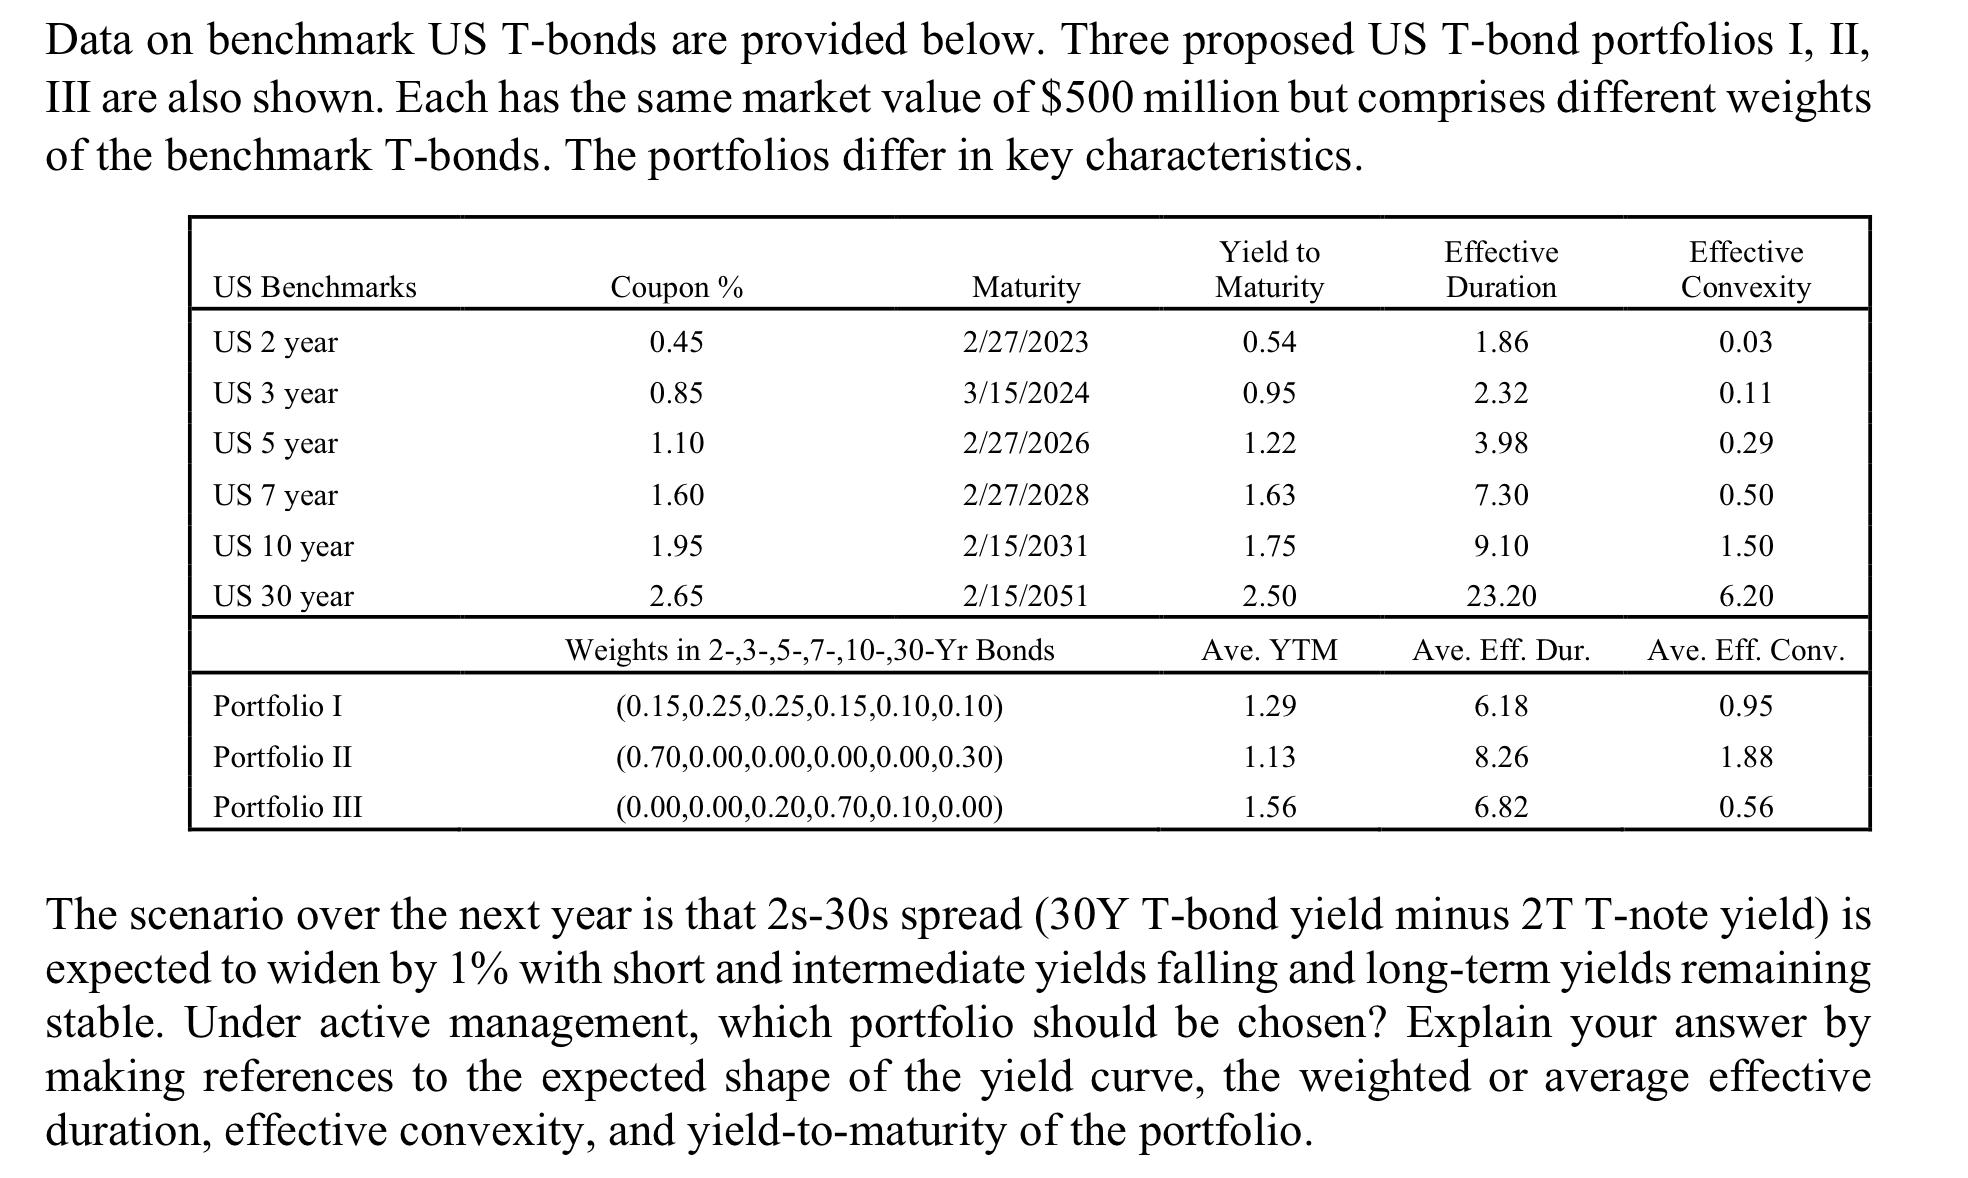 Data on benchmark US T-bonds are provided below. Three proposed US T-bond portfolios I, II, III are also